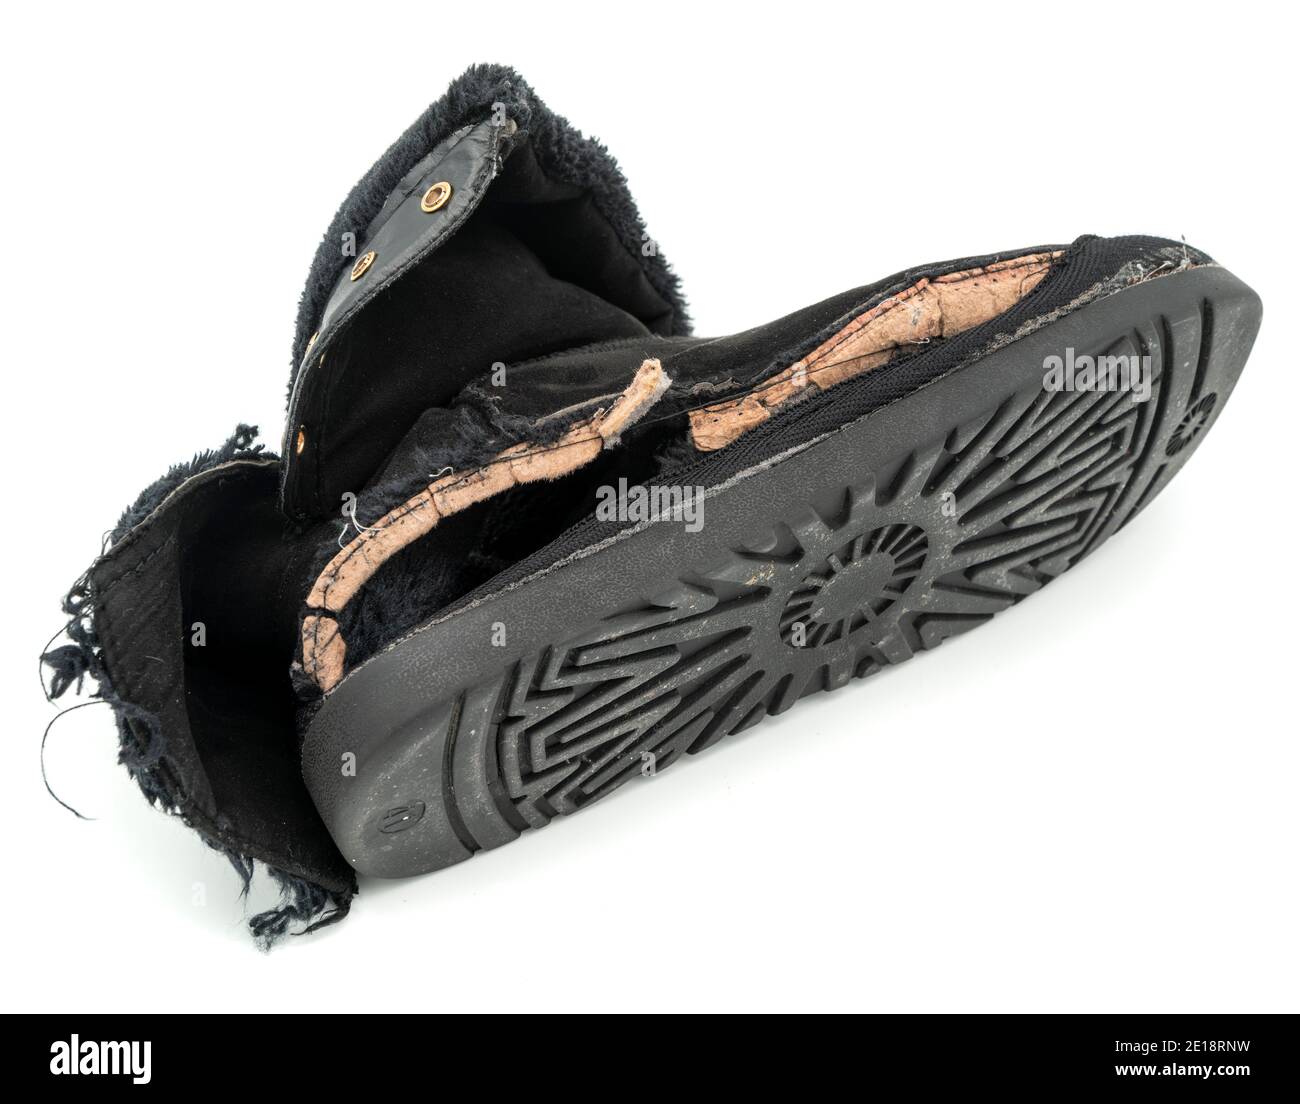 Ruined black shoe chewed by a dog Stock Photo